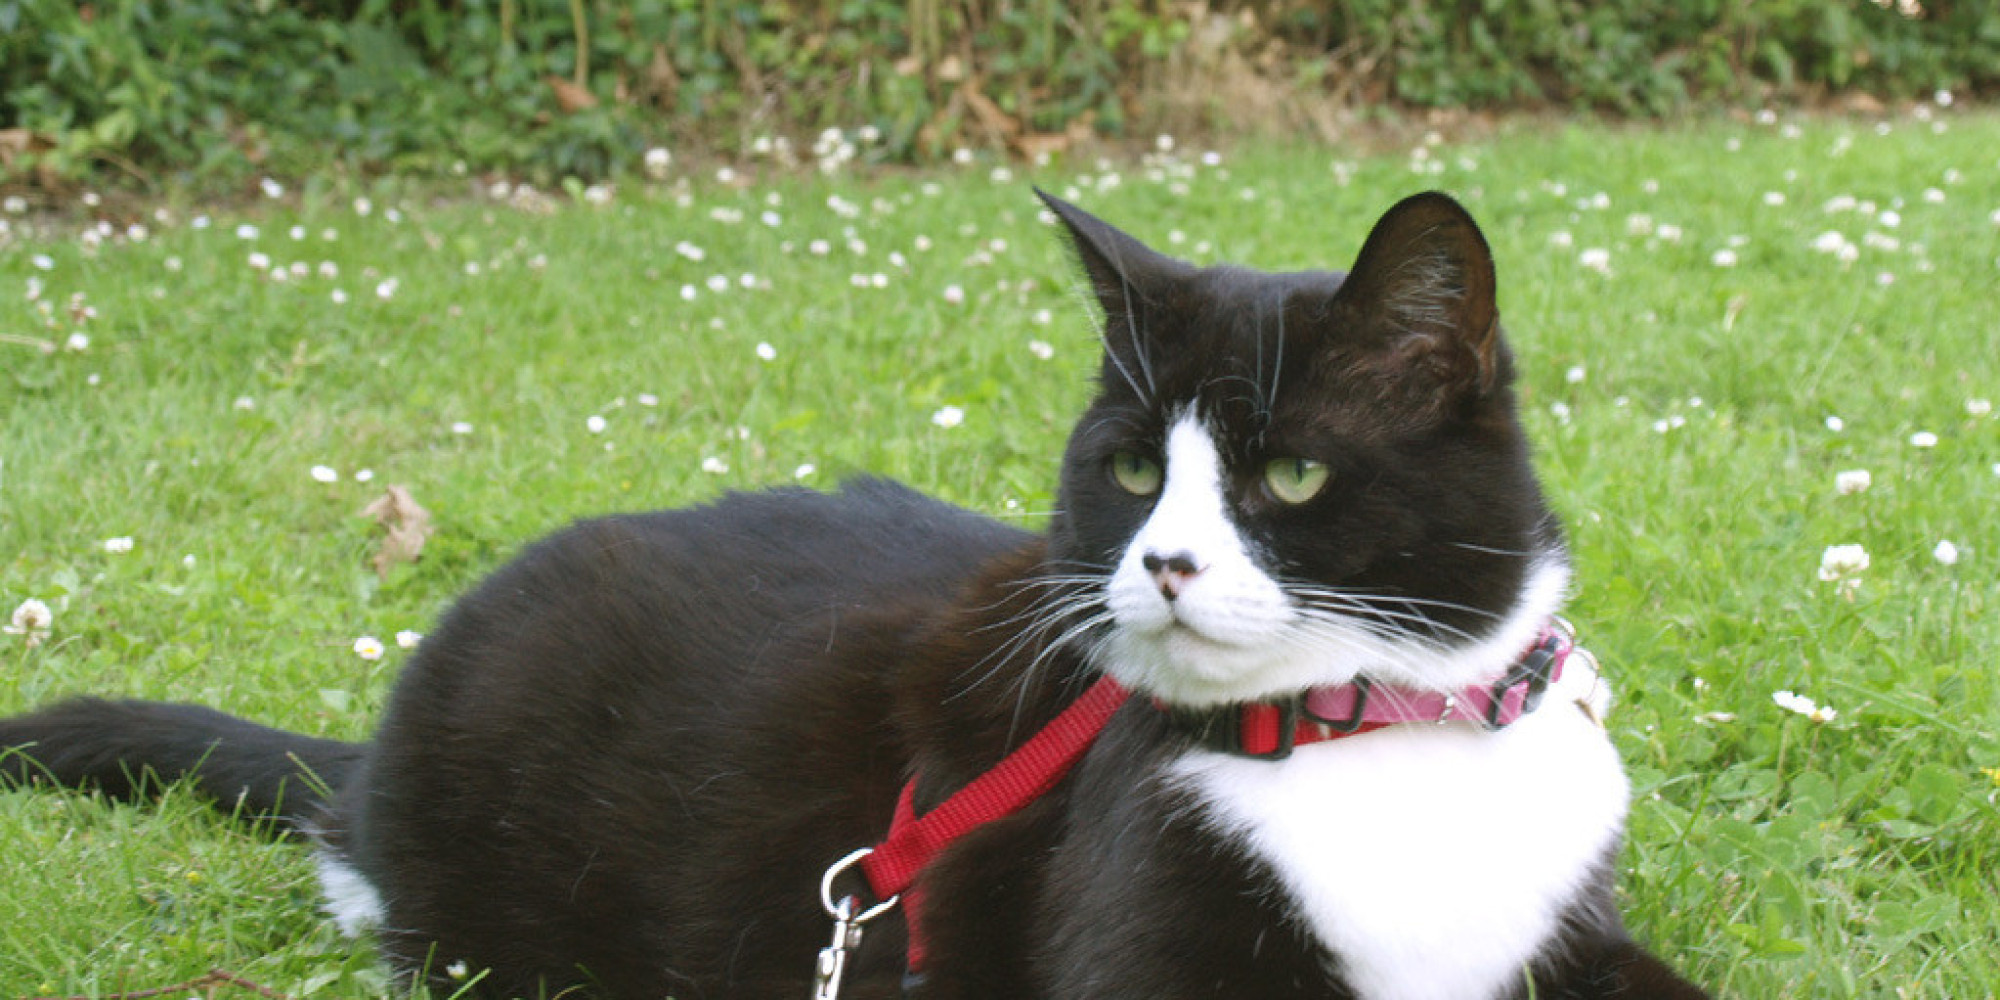 How To Walk Your Cat On A Leash, And Why You Should